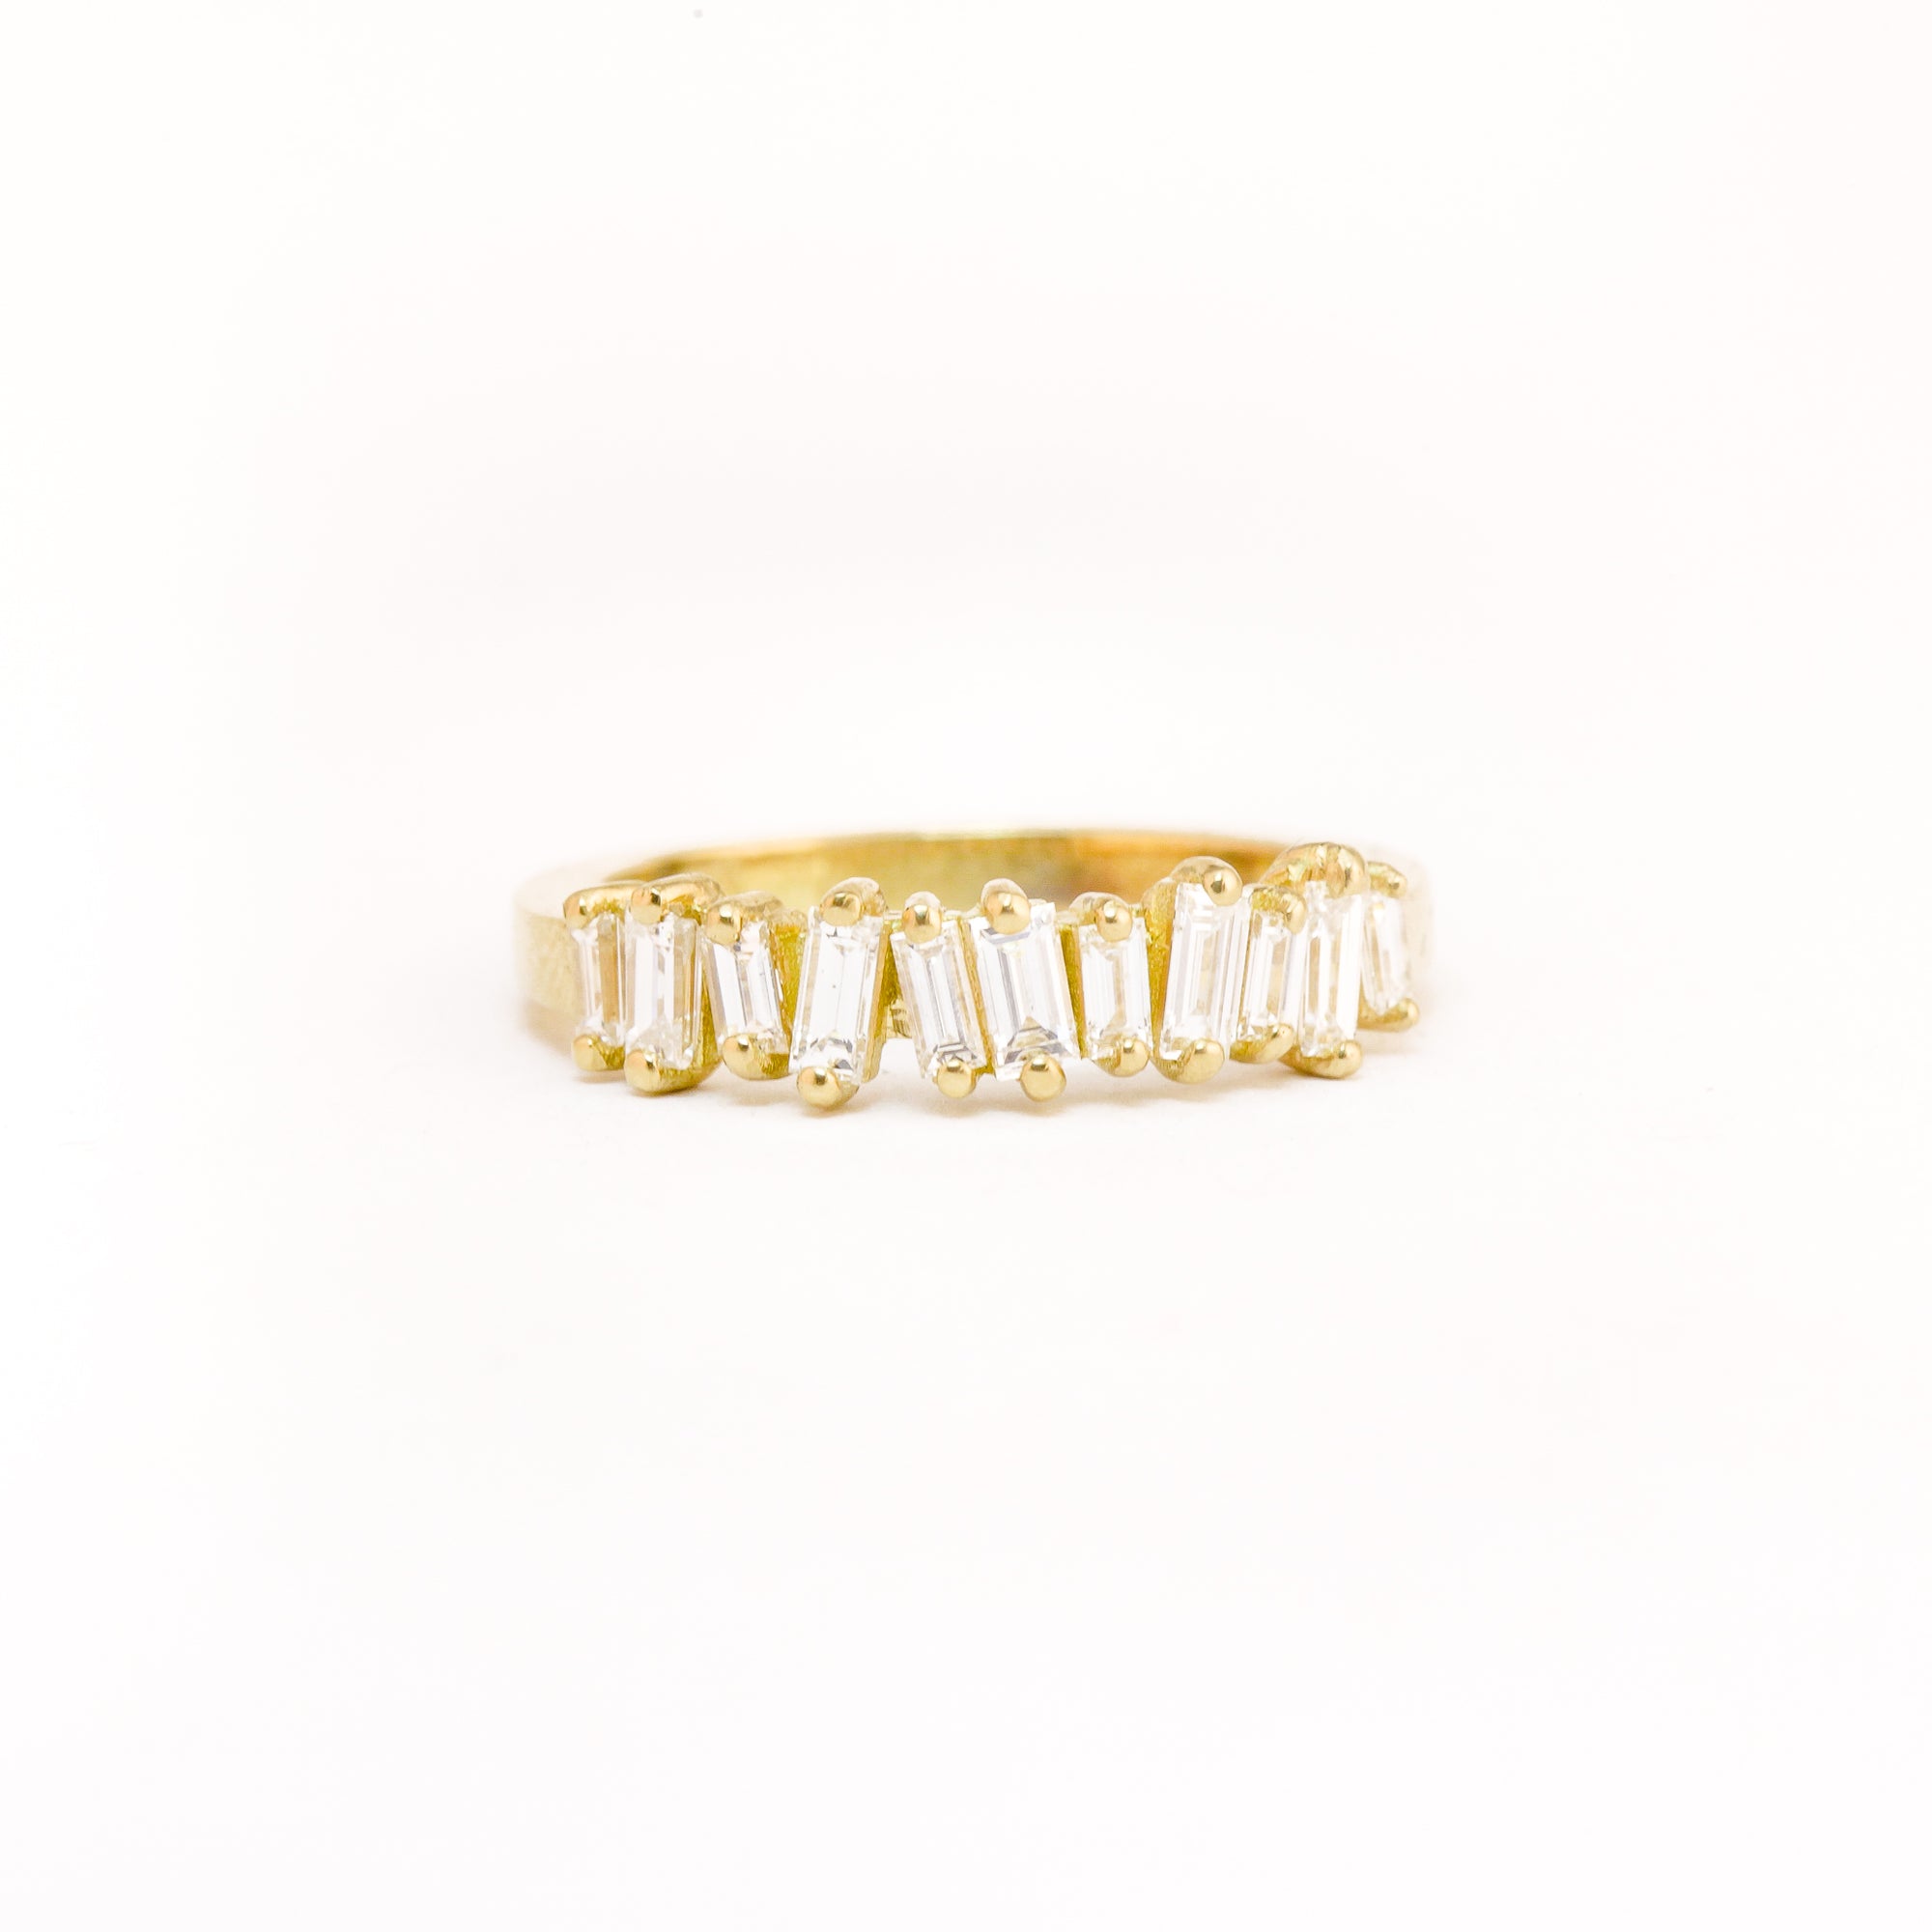 Made in Melbourne, bespoke line up of diamonds in row in an 18ct yellow band. 